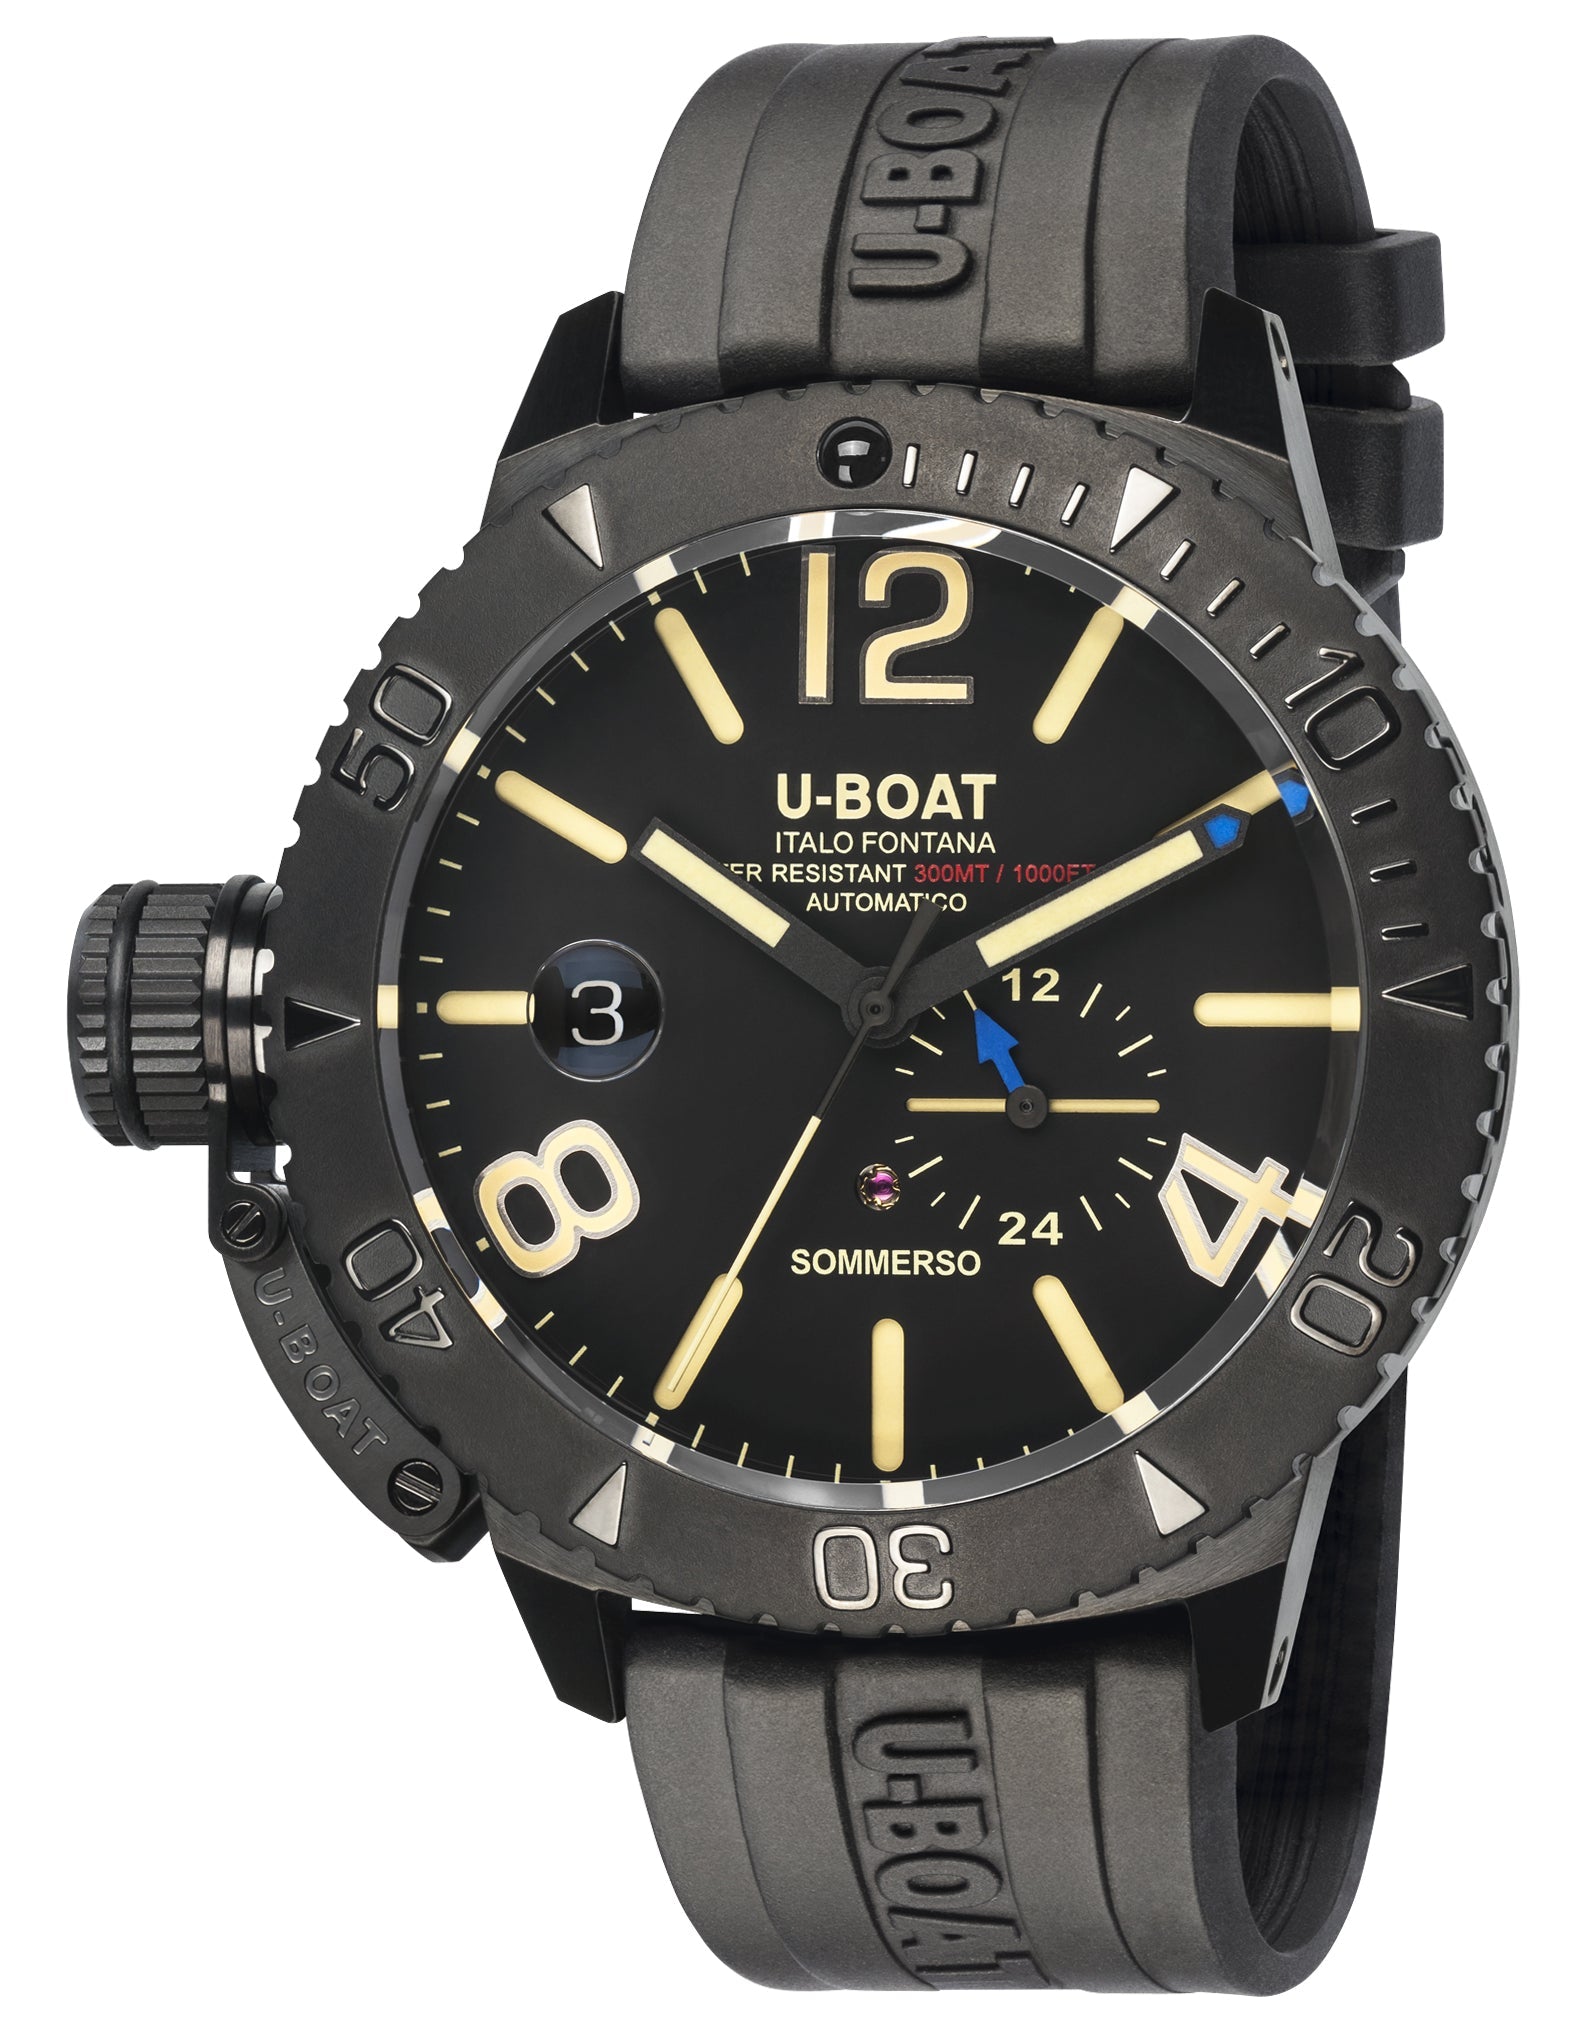 update alt-text with template Watches - Mens-U-Boat-9015-24-hour display, 45 - 50 mm, black, black PVD case, date, day/night indicator, divers, mens, menswatches, new arrivals, round, rpSKU_8527, rpSKU_8890, rpSKU_8891, rpSKU_8893, rpSKU_9007/A, rubber, Sommerso, swiss automatic, U-Boat, uni-directional rotating bezel, watches-Watches & Beyond